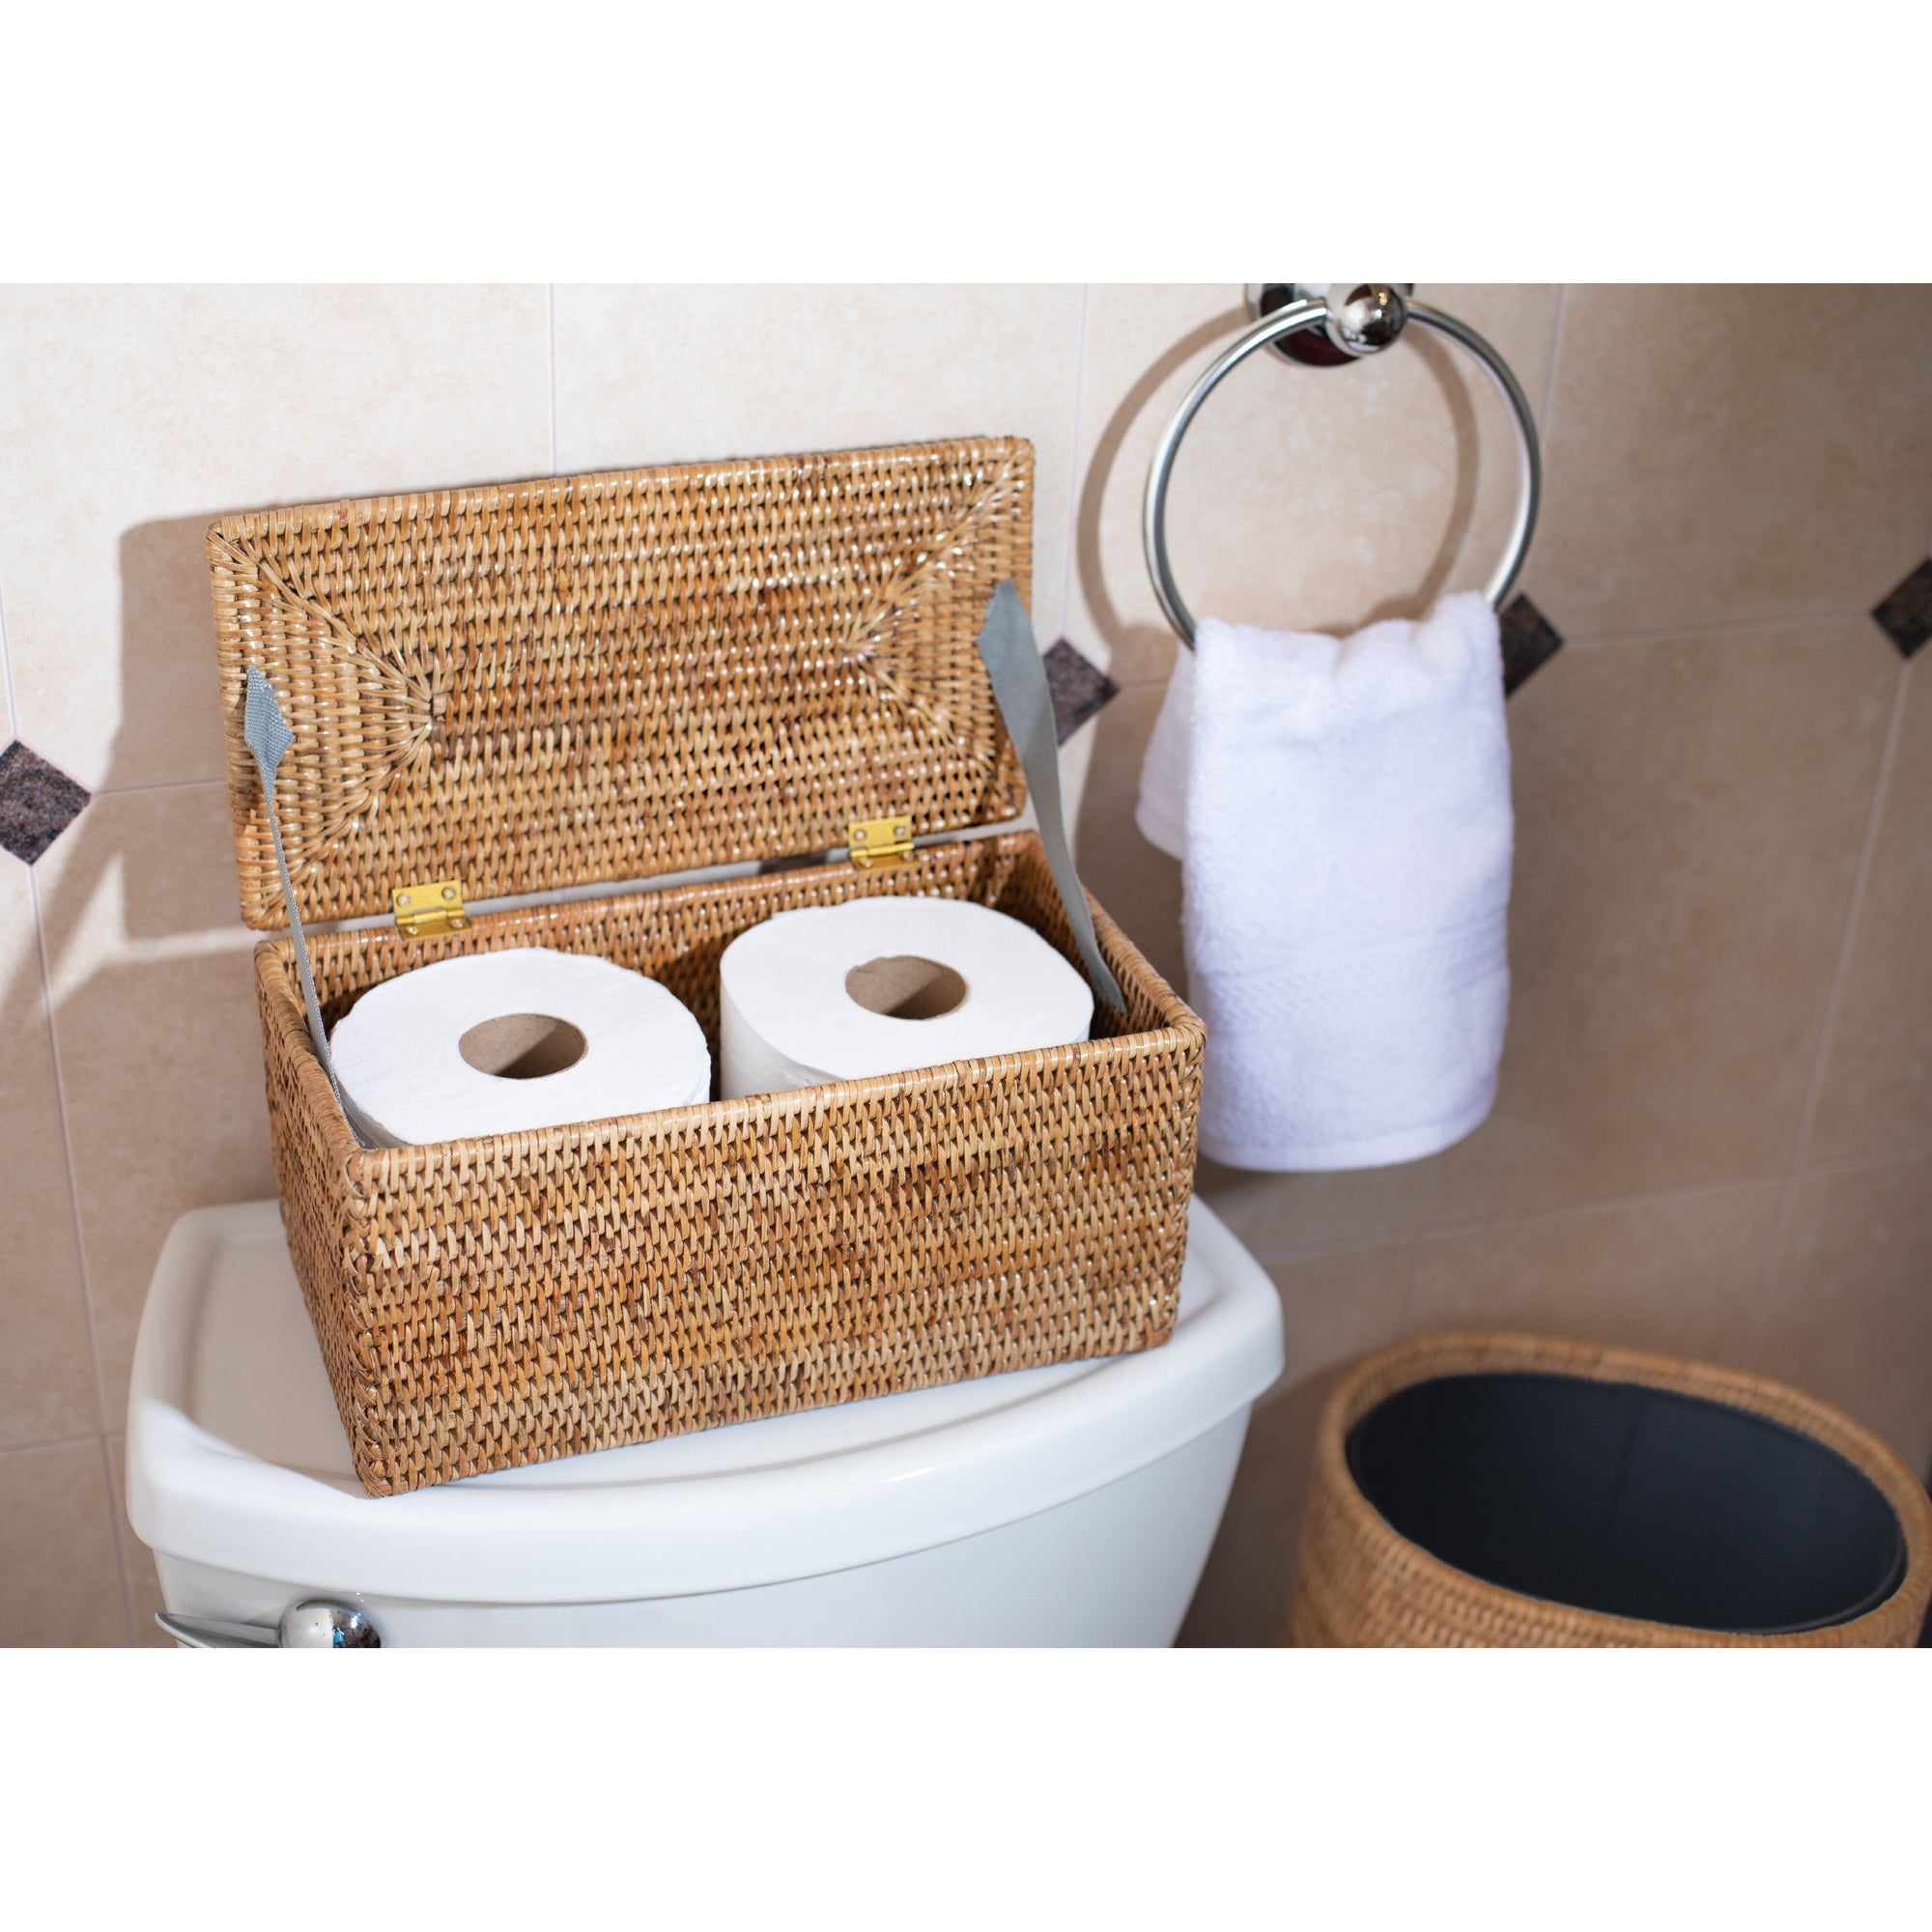 Rectangular Double Toilet Roll Holder with Hinged Lid